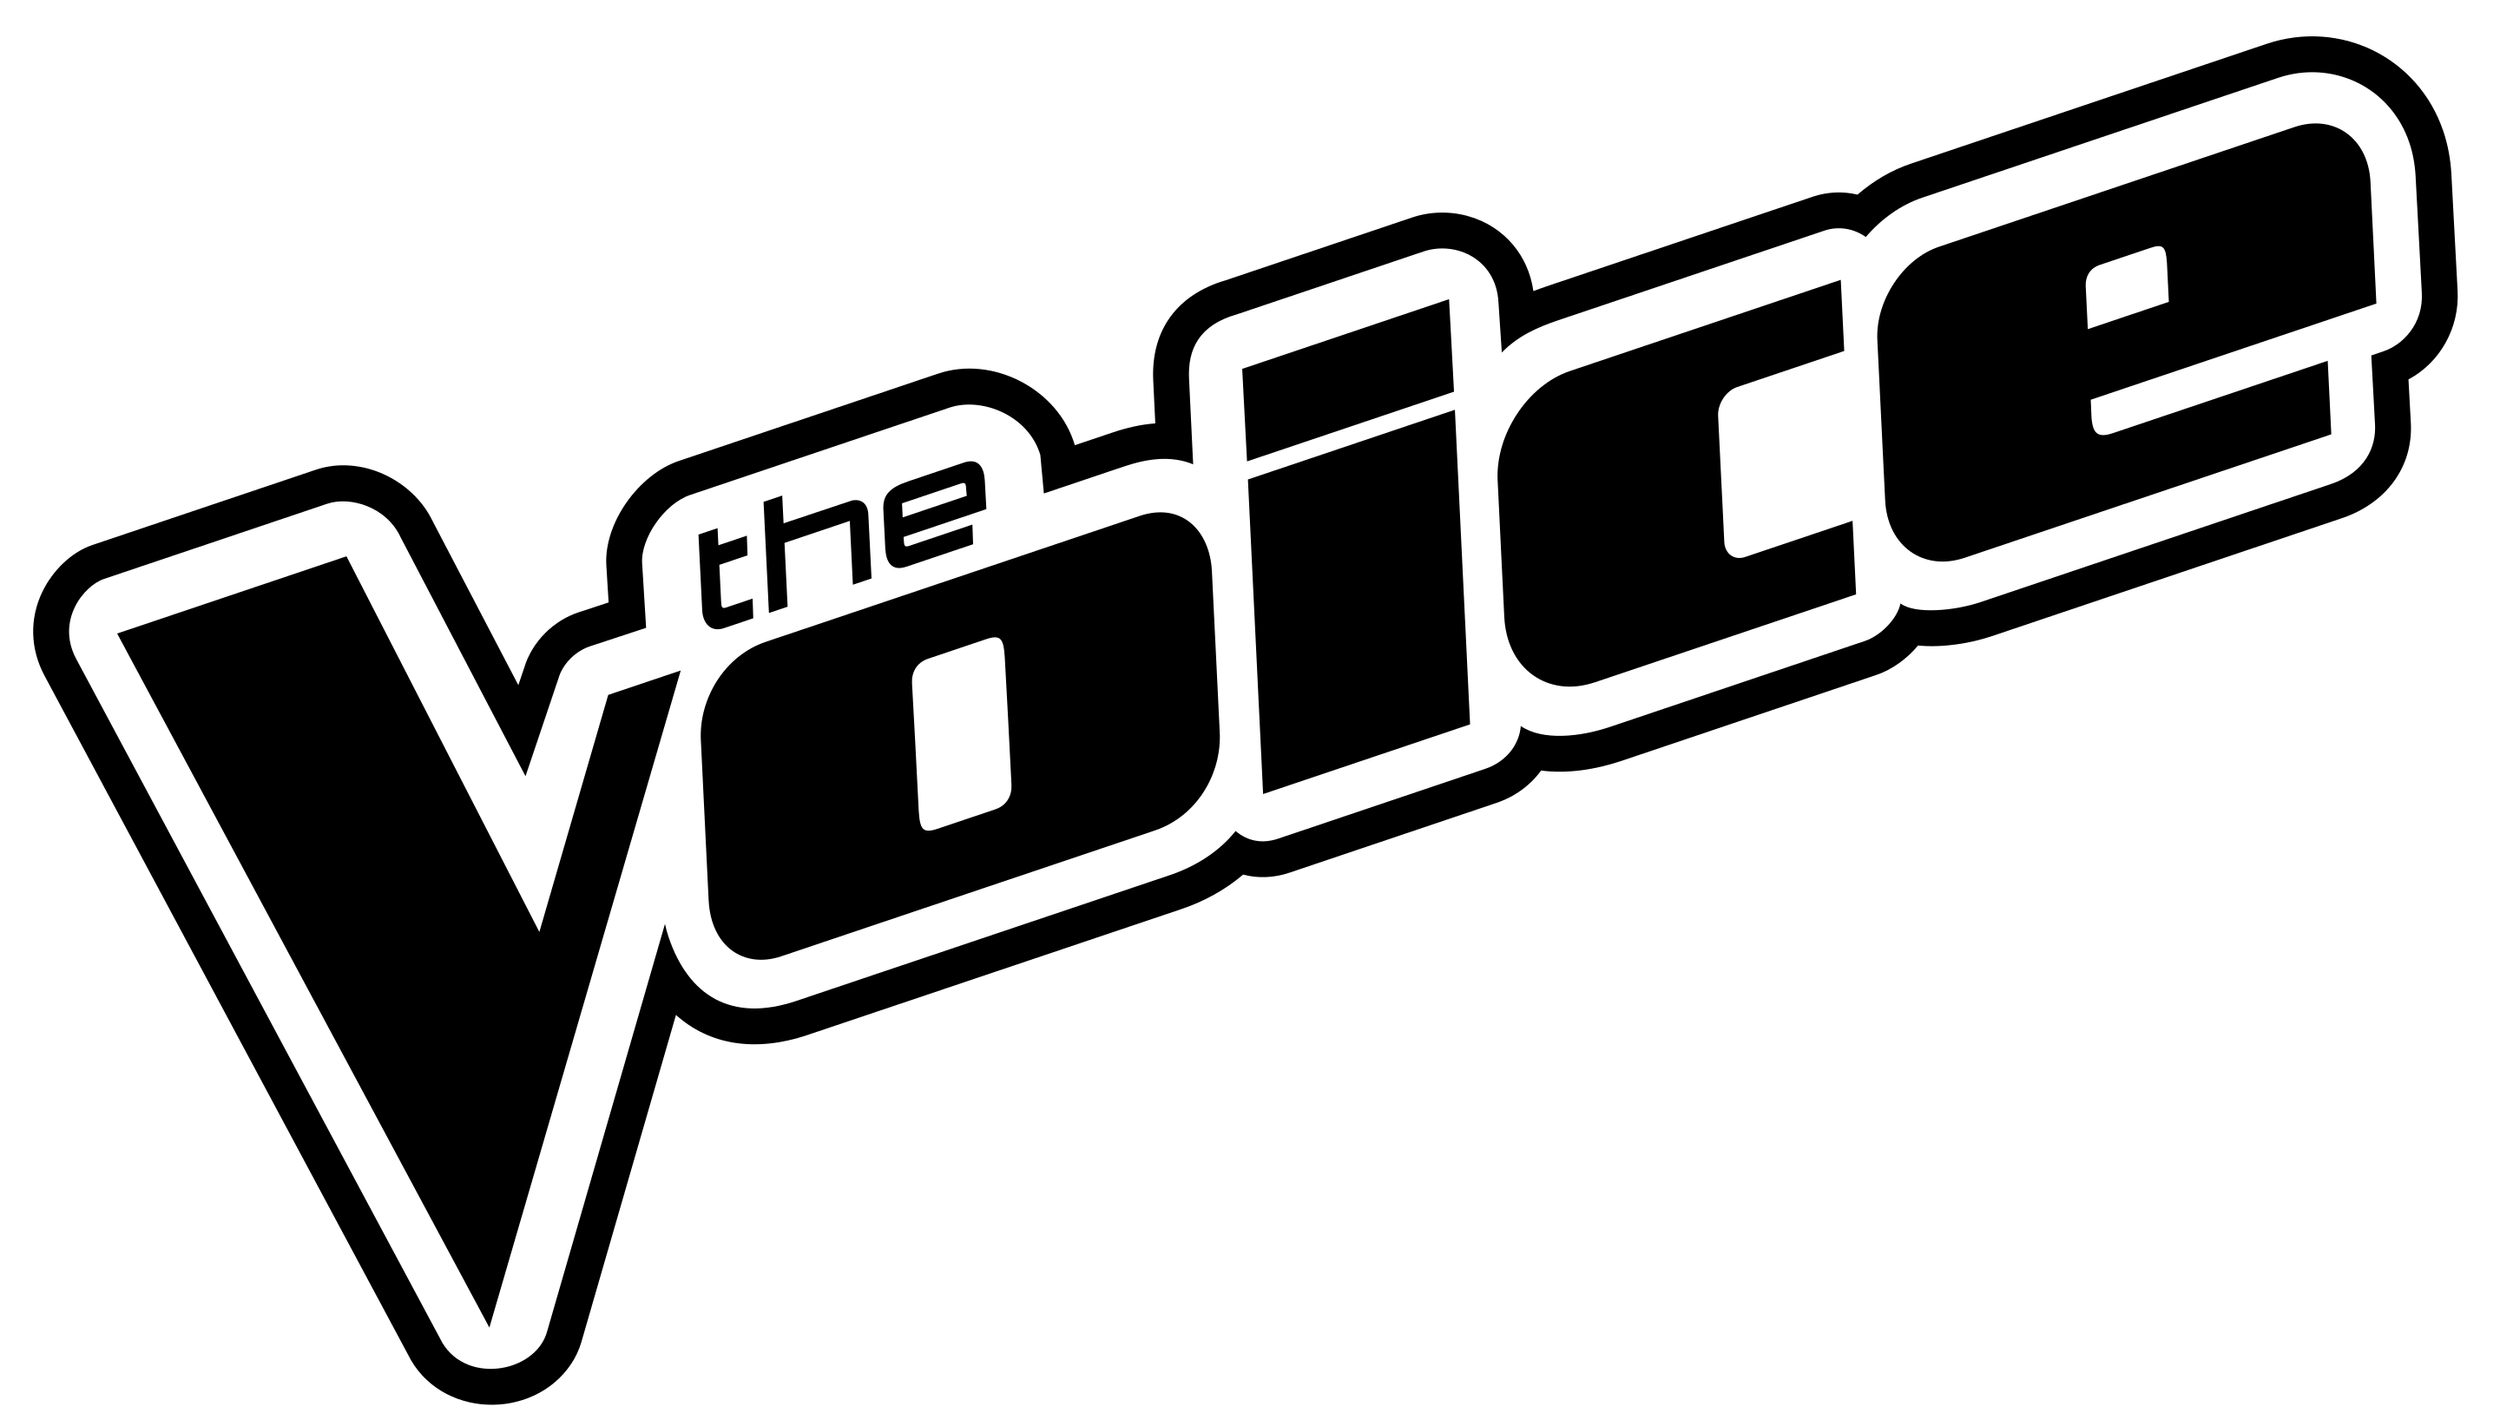 The_Voice_logo.svg.png